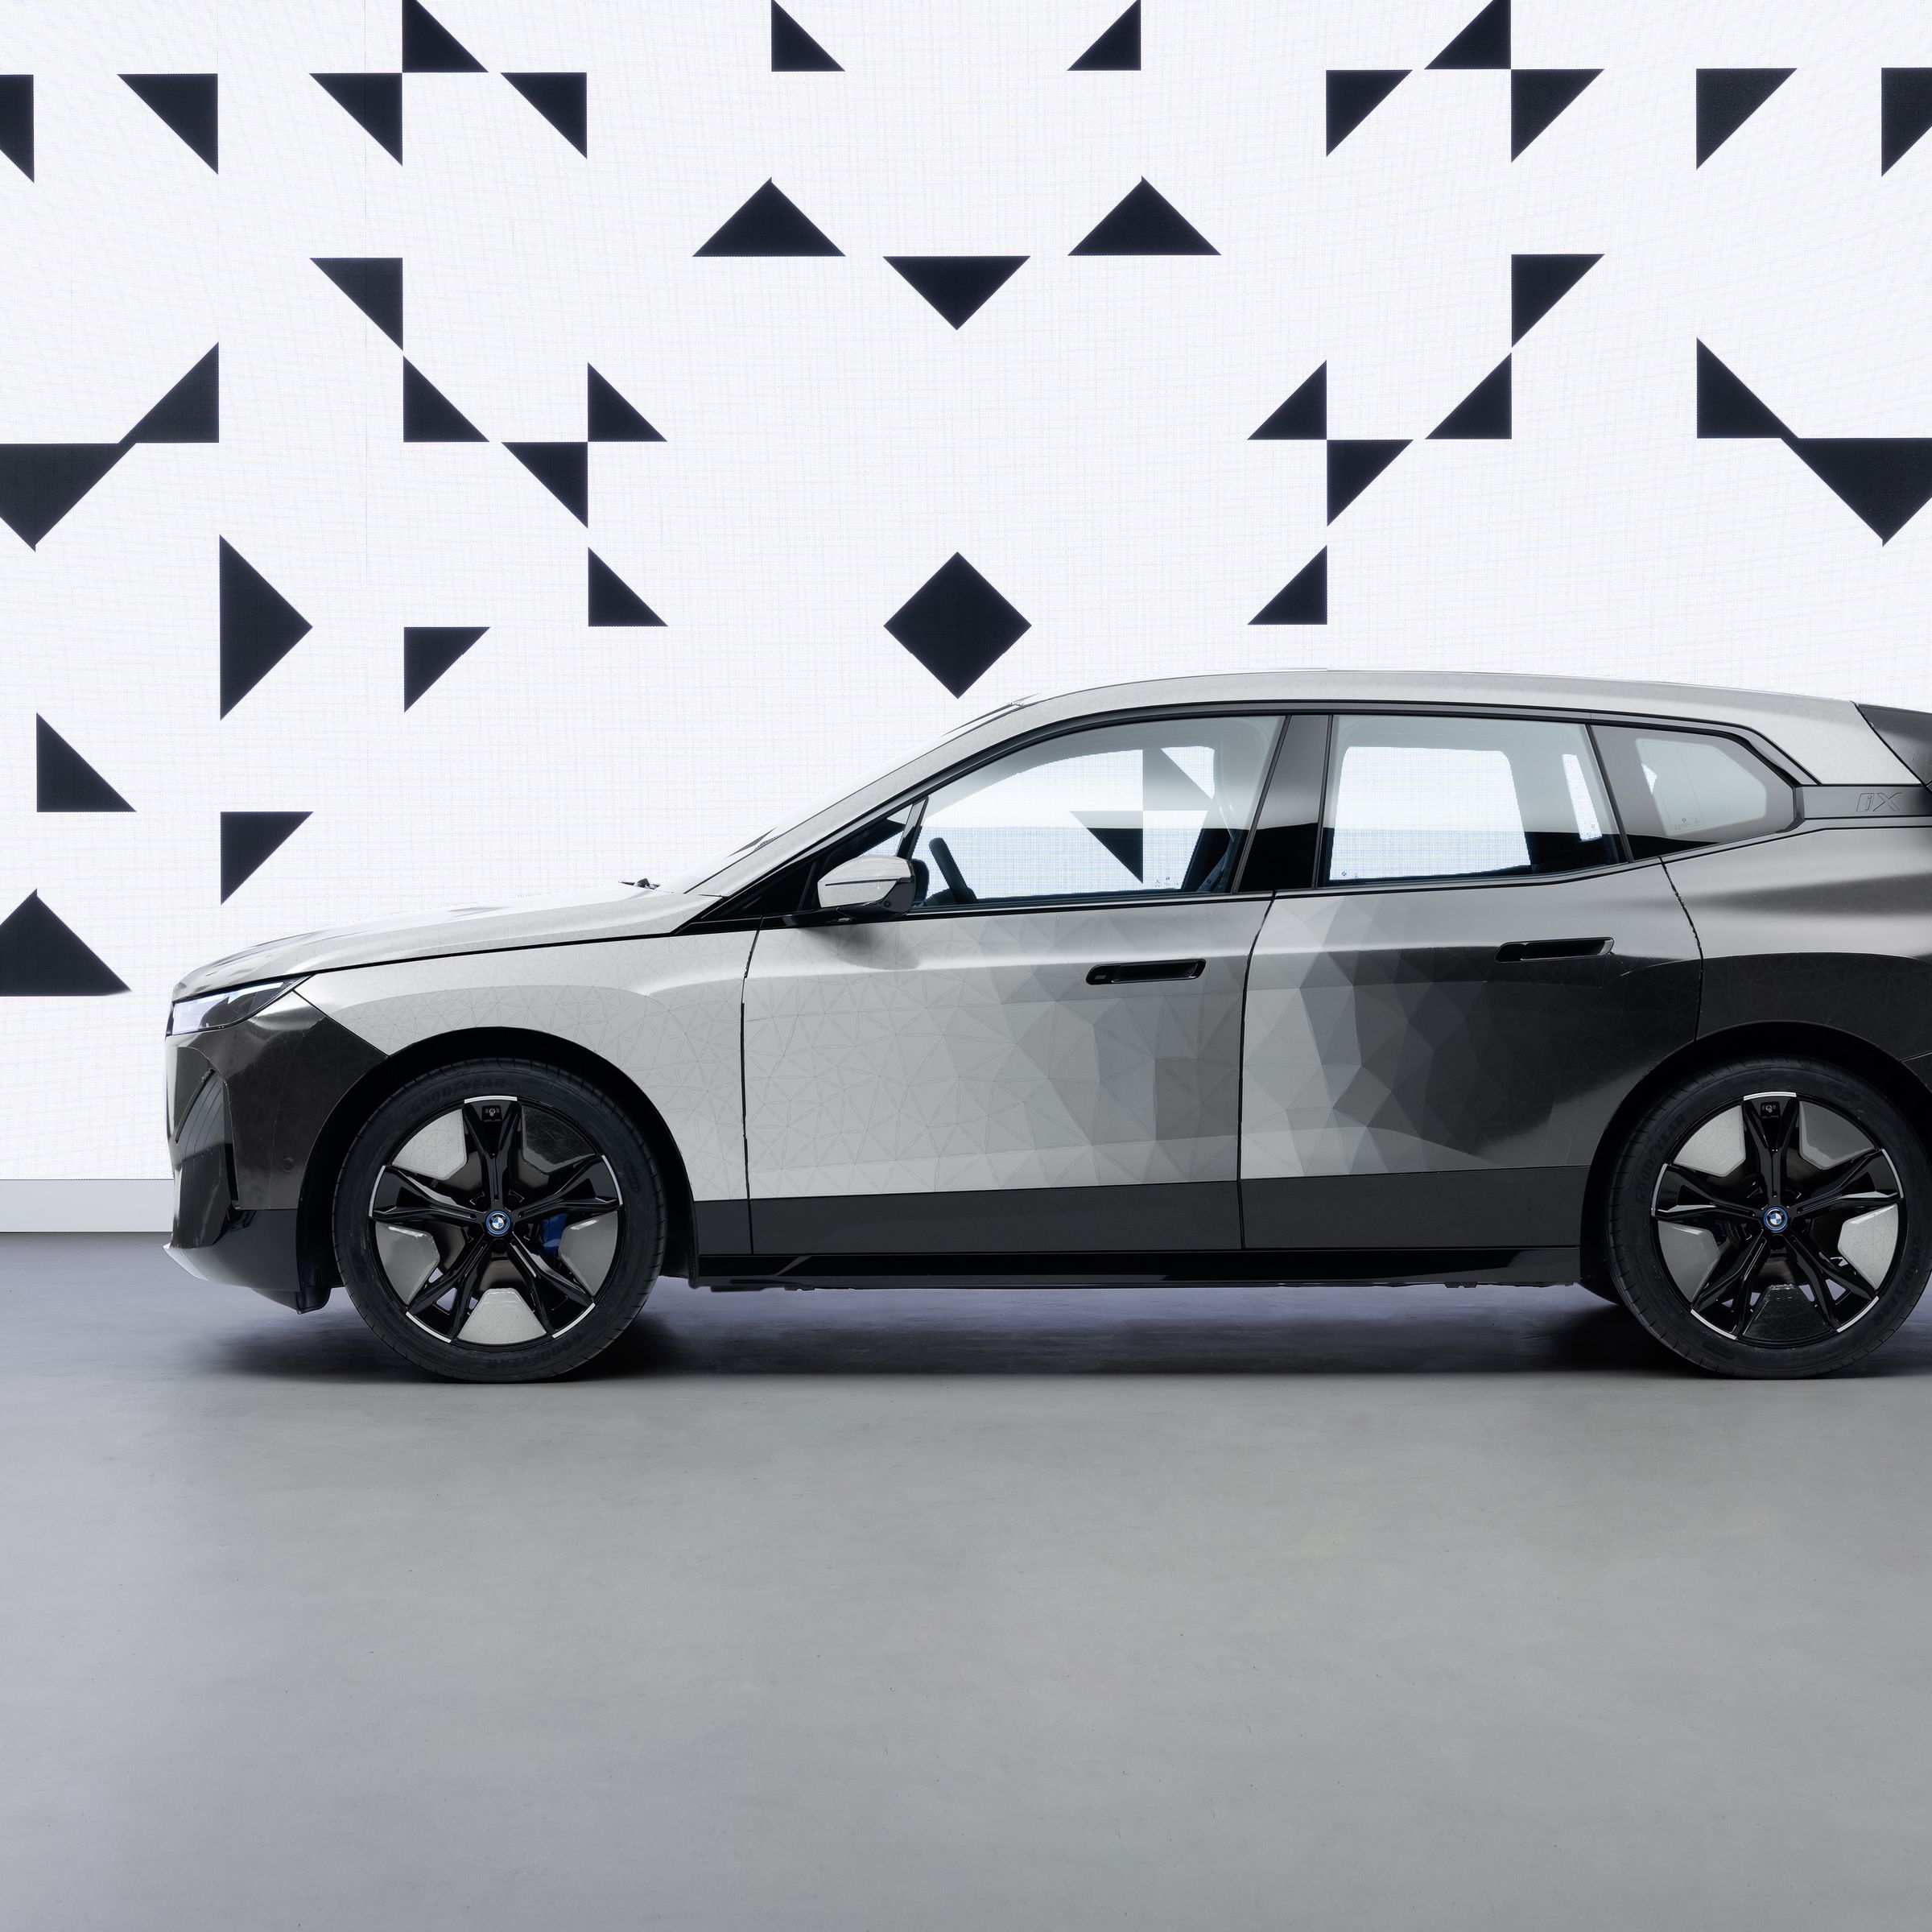 A BMW concept using e-ink to automatically change the paint color on a car from white to black and back again